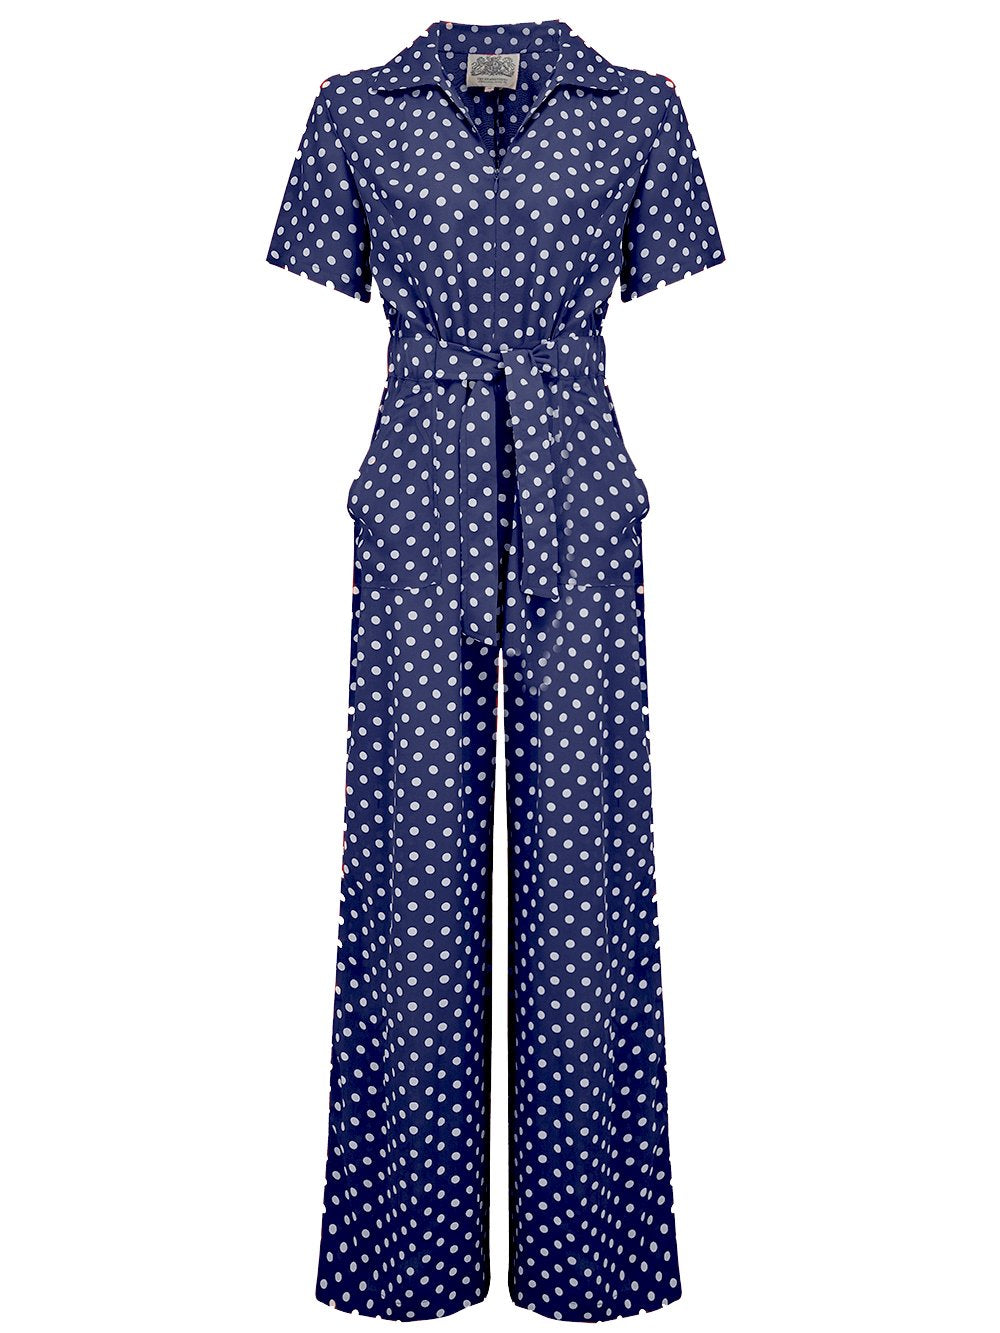 Vintage Wide Leg Pants & Beach Pajamas History Lauren Siren Jump Suit in Navy Blue with Polka Dot Spots by The Seamstress of Bloomsbury Classic 1940s Vintage Style £89.95 AT vintagedancer.com